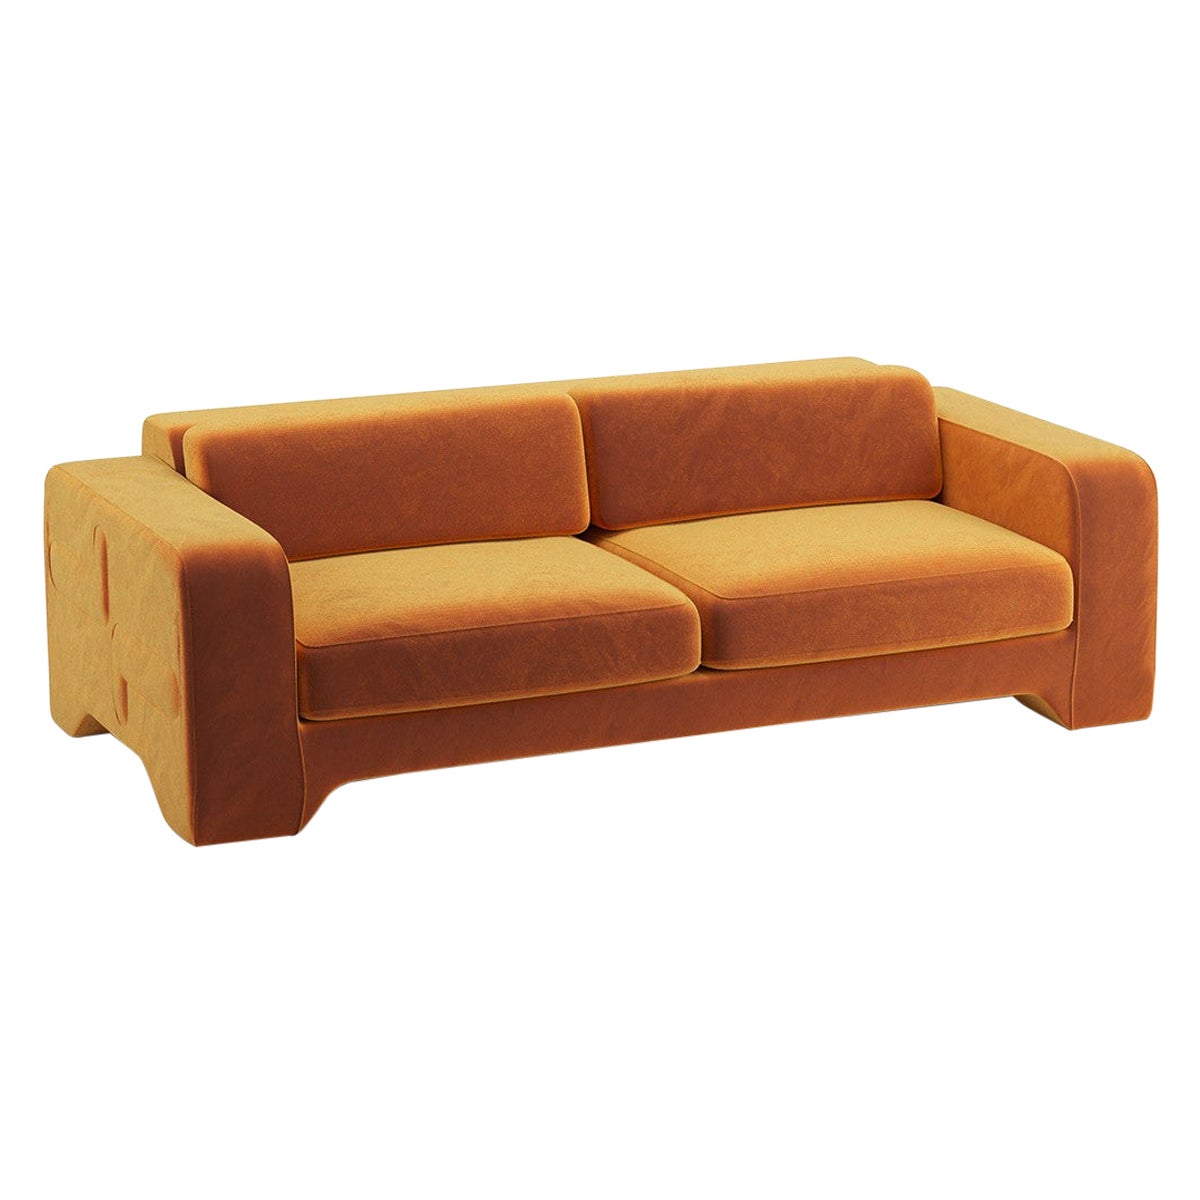 Popus Editions Giovanna 2.5 Seater Sofa in Cognac Como Velvet Upholstery For Sale